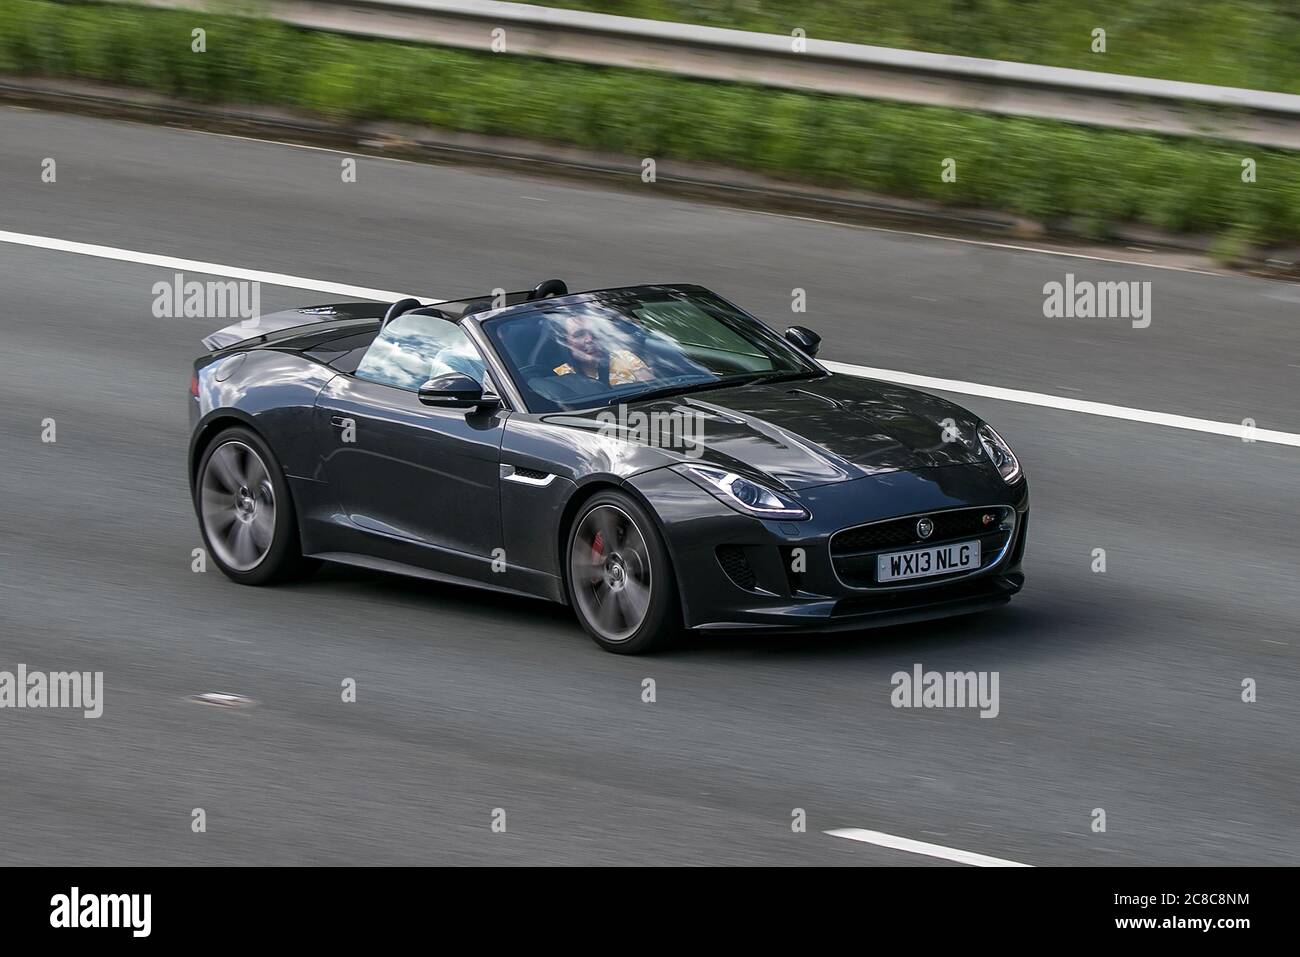 A 2013 Jaguar F-Type S V8 Auto Grey Car Roadster Petrol convertible cabriolet roof down driving on the M6motorway near Preston in Lancashire, UK Stock Photo